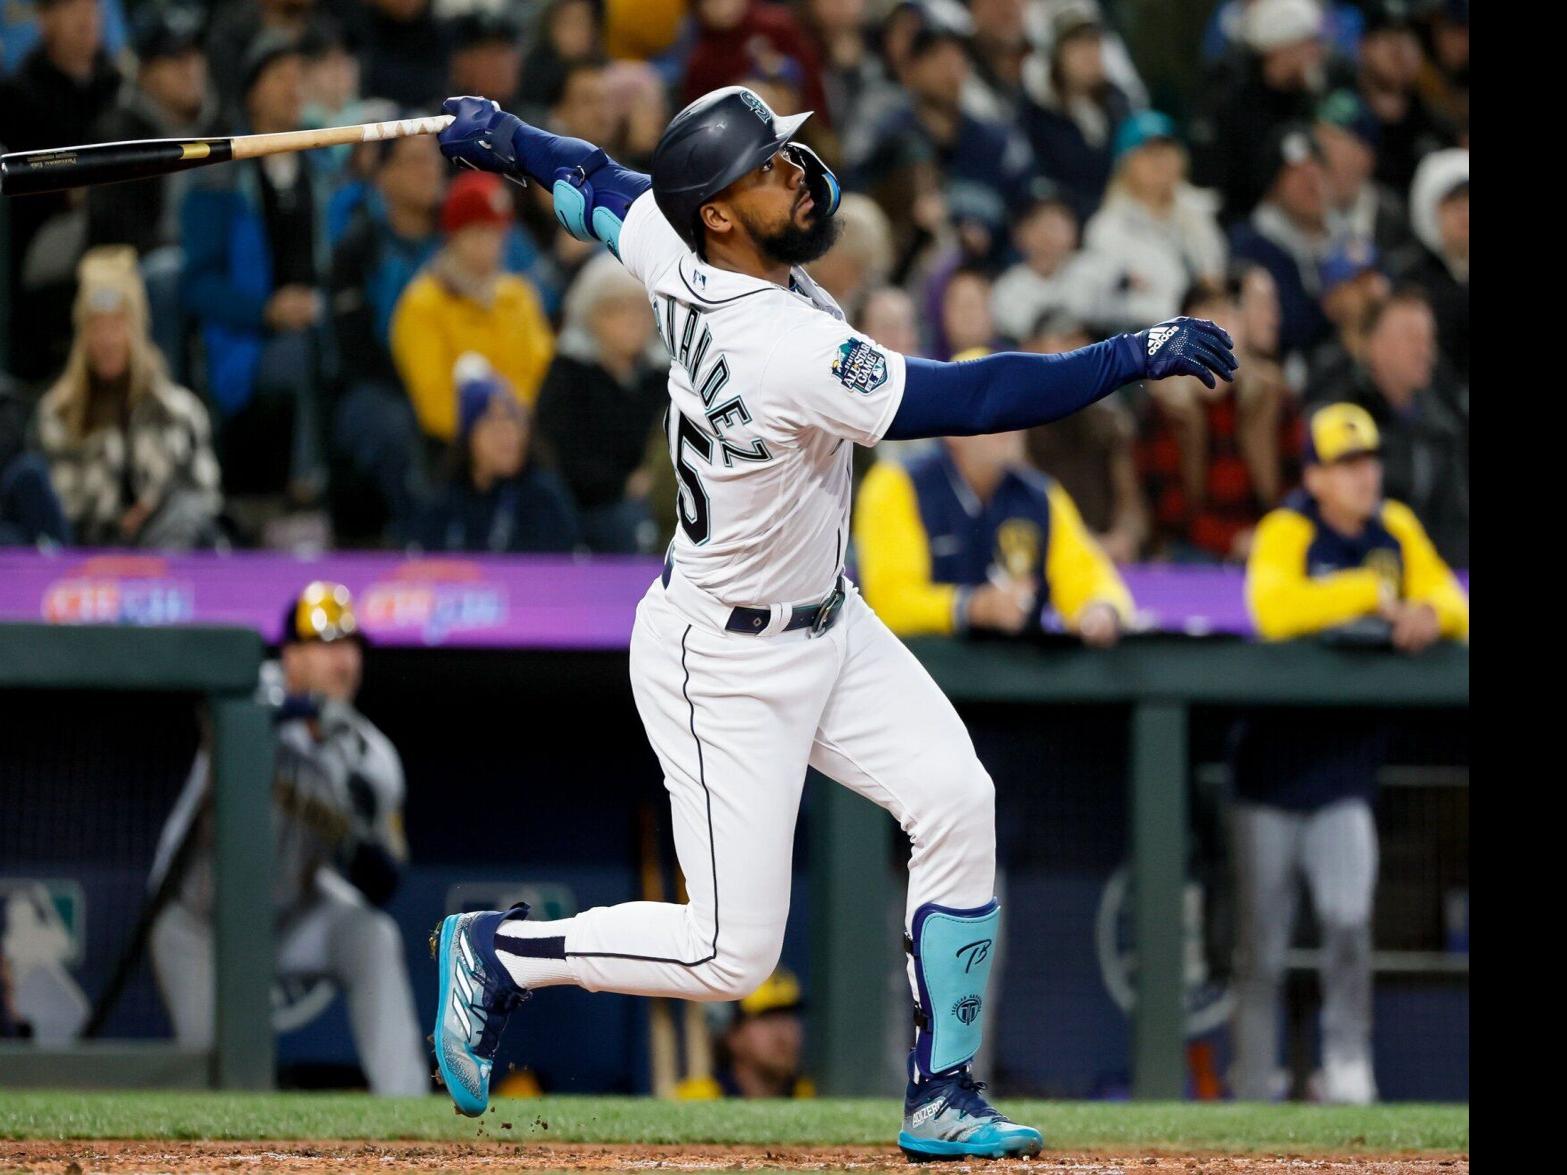 Teoscar Hernandez returns to Blue Jays with Mariners, who ended their  season last year, Mariners